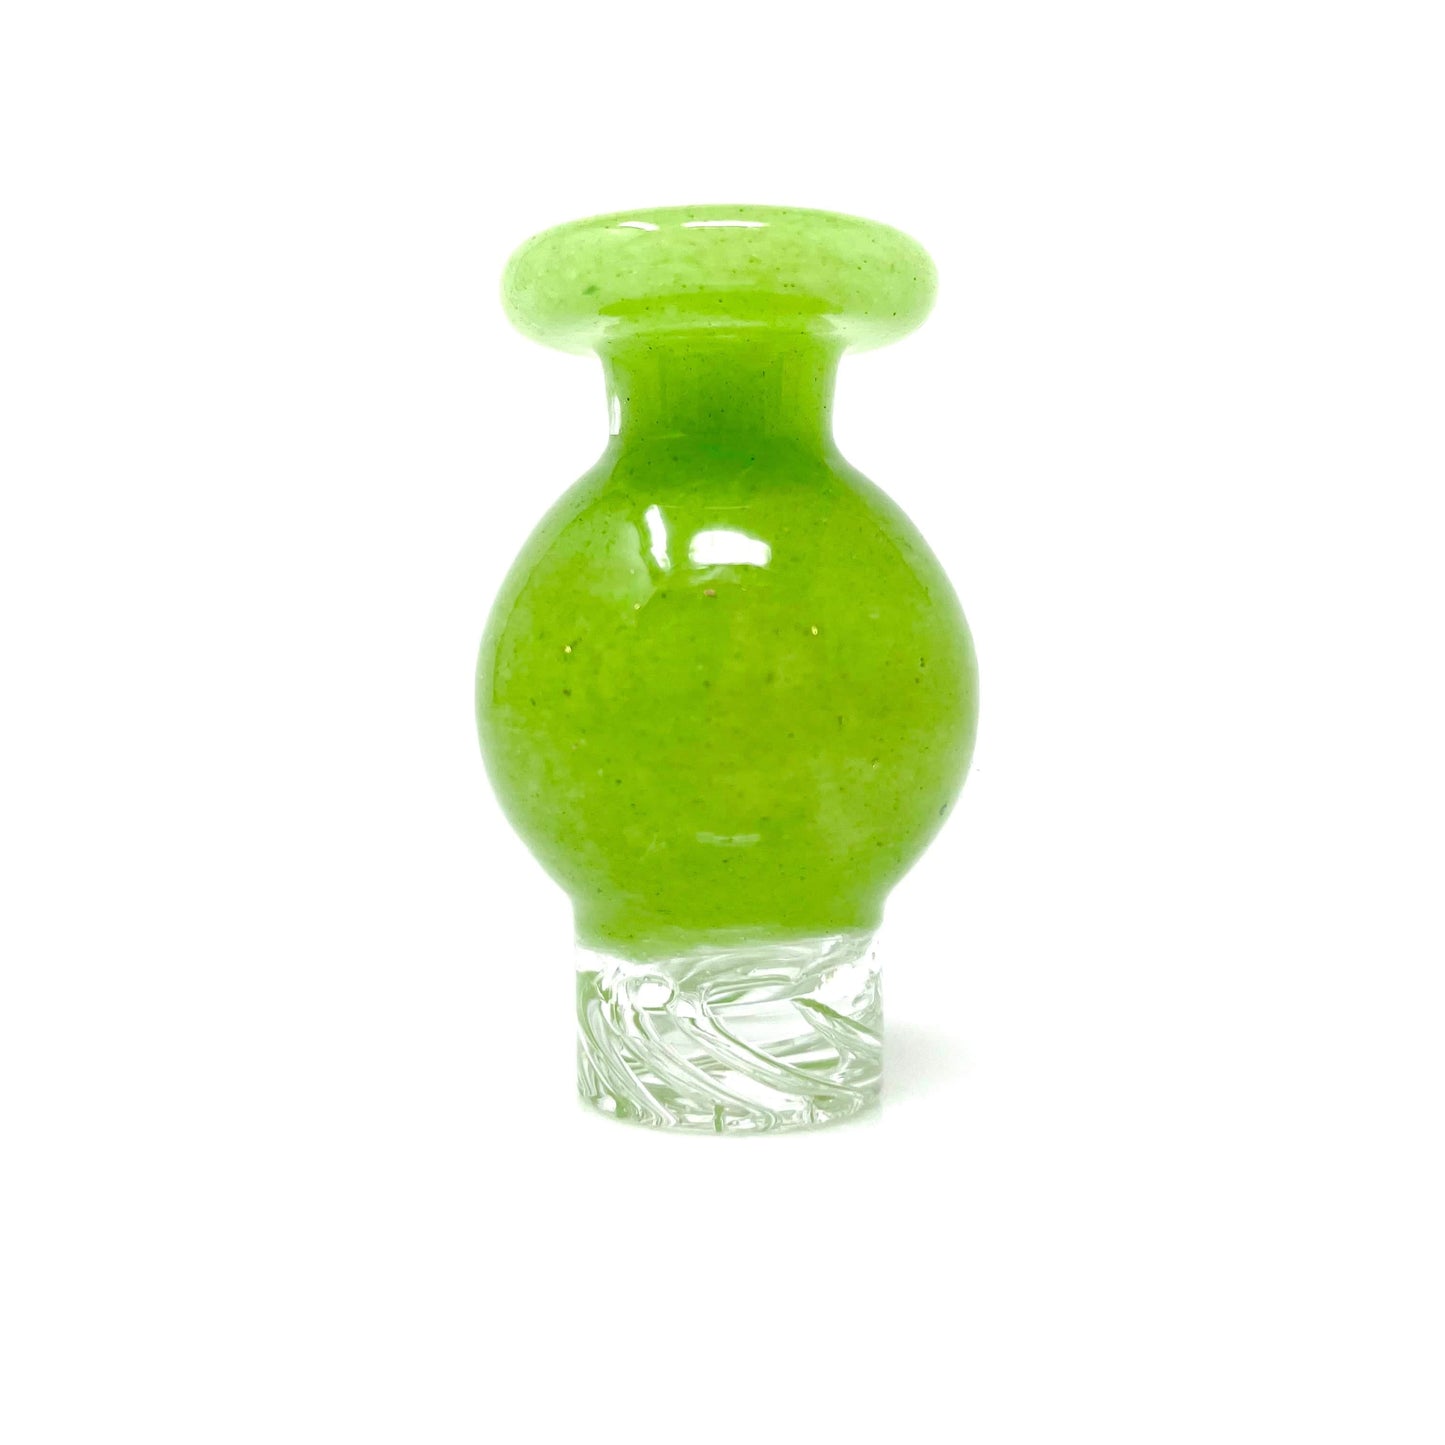 AFM Smoke Carb Cap Green Dot Turbo Glass Spinner Carb Cap + 2 Pearls